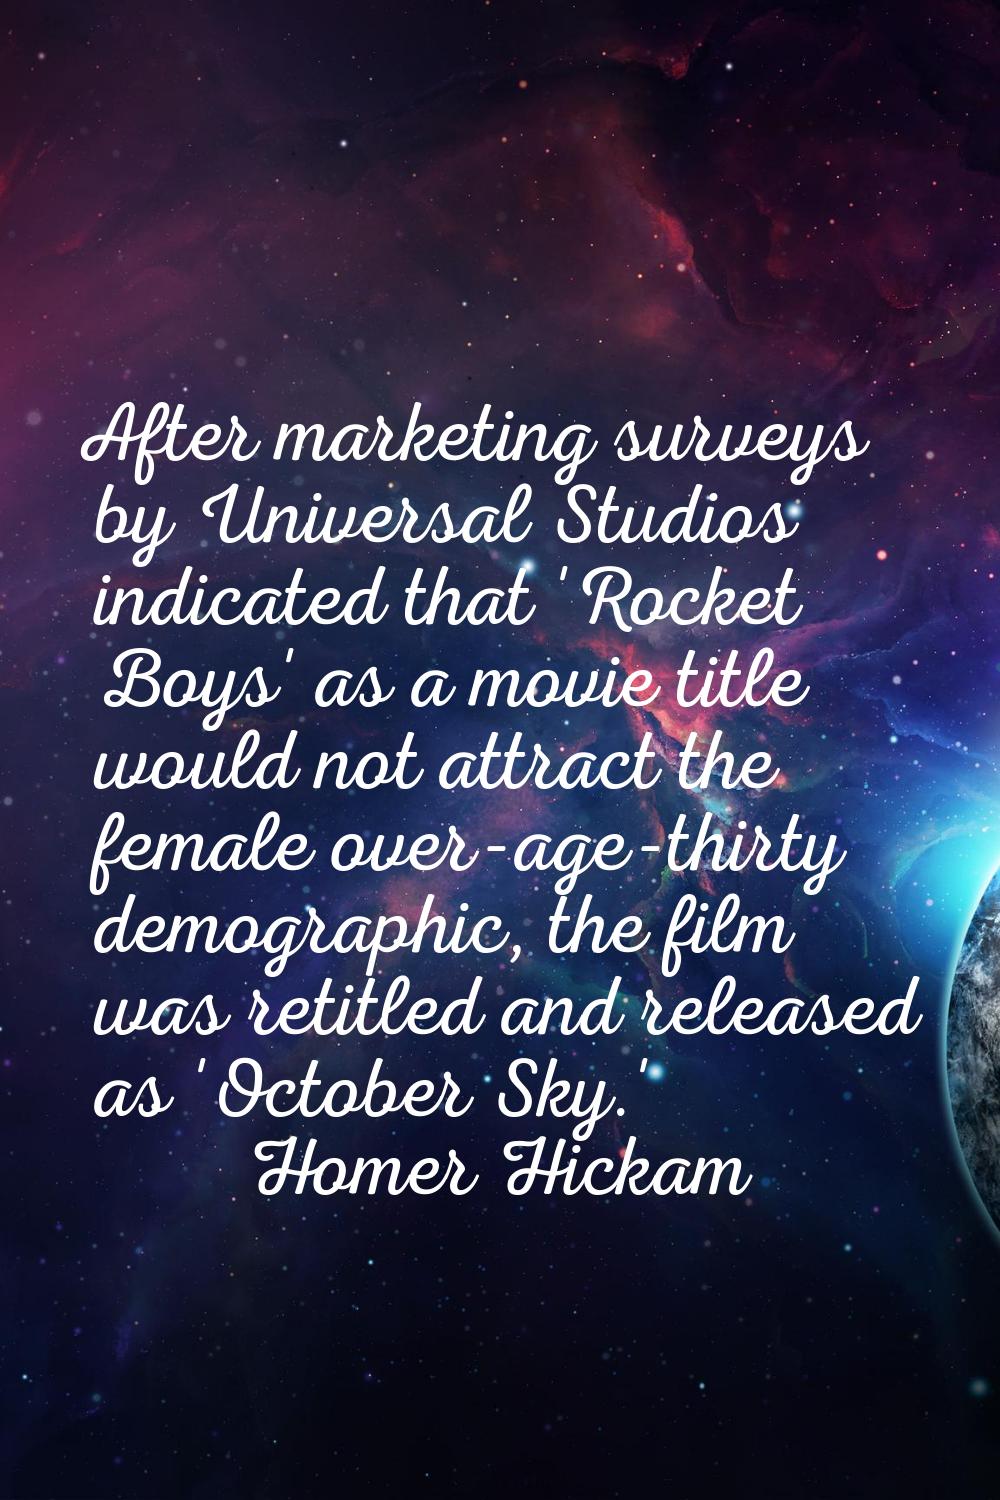 After marketing surveys by Universal Studios indicated that 'Rocket Boys' as a movie title would no